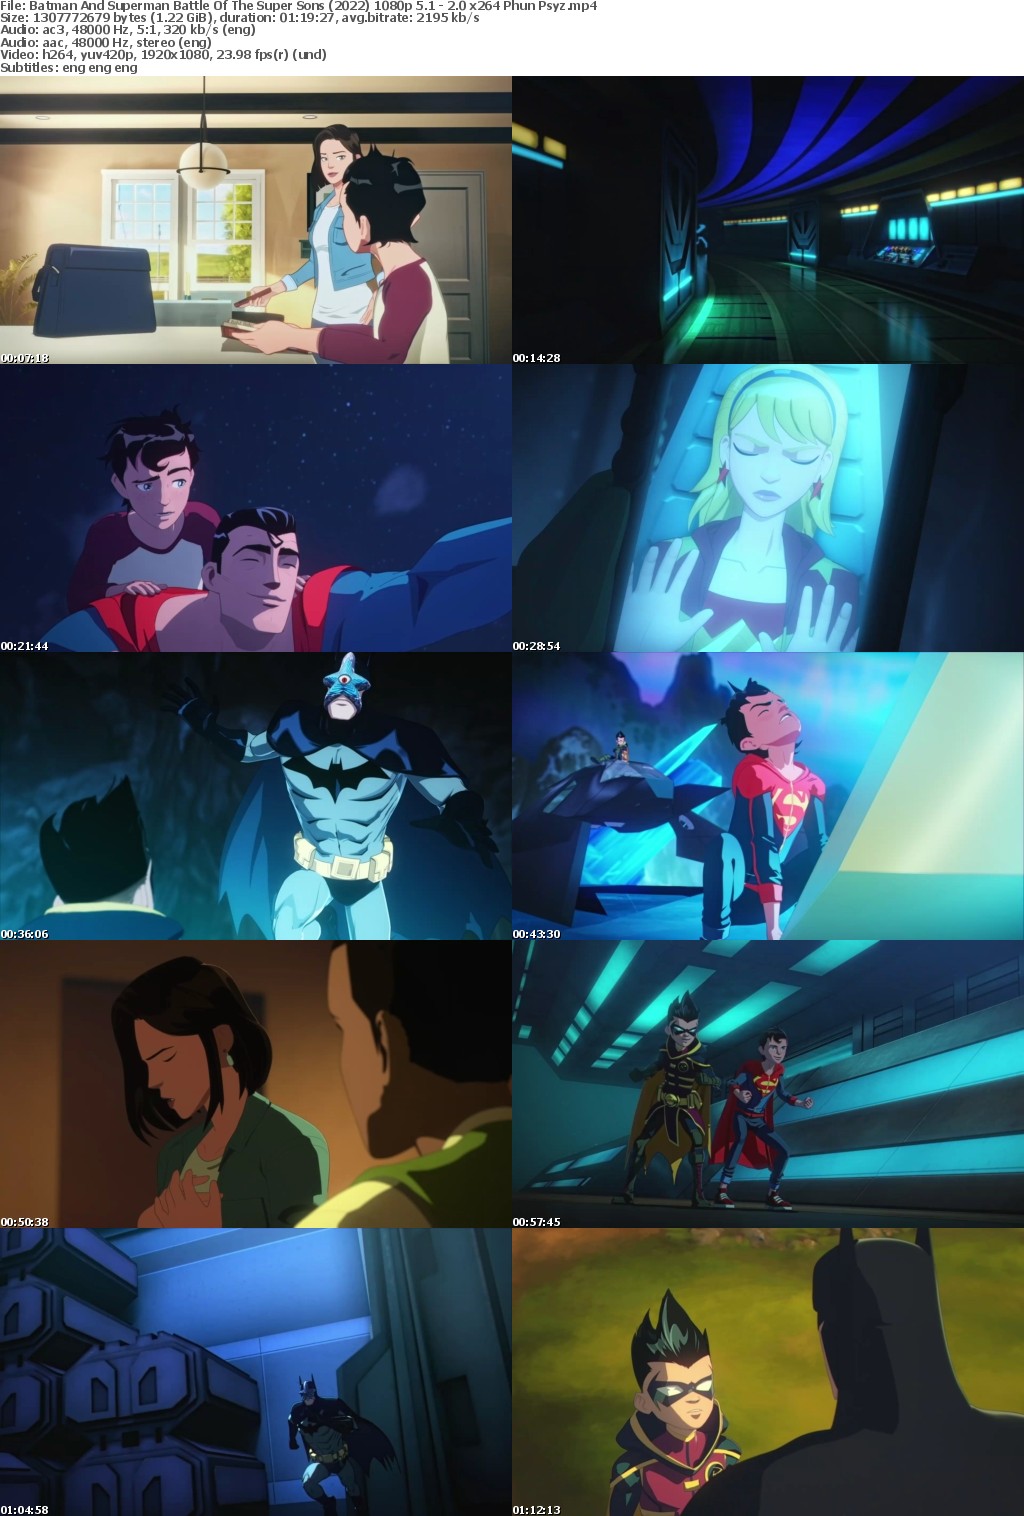 Batman And Superman Battle Of The Super Sons (2022) 1080p 5 1 - 2 0 x264 Phun Psyz